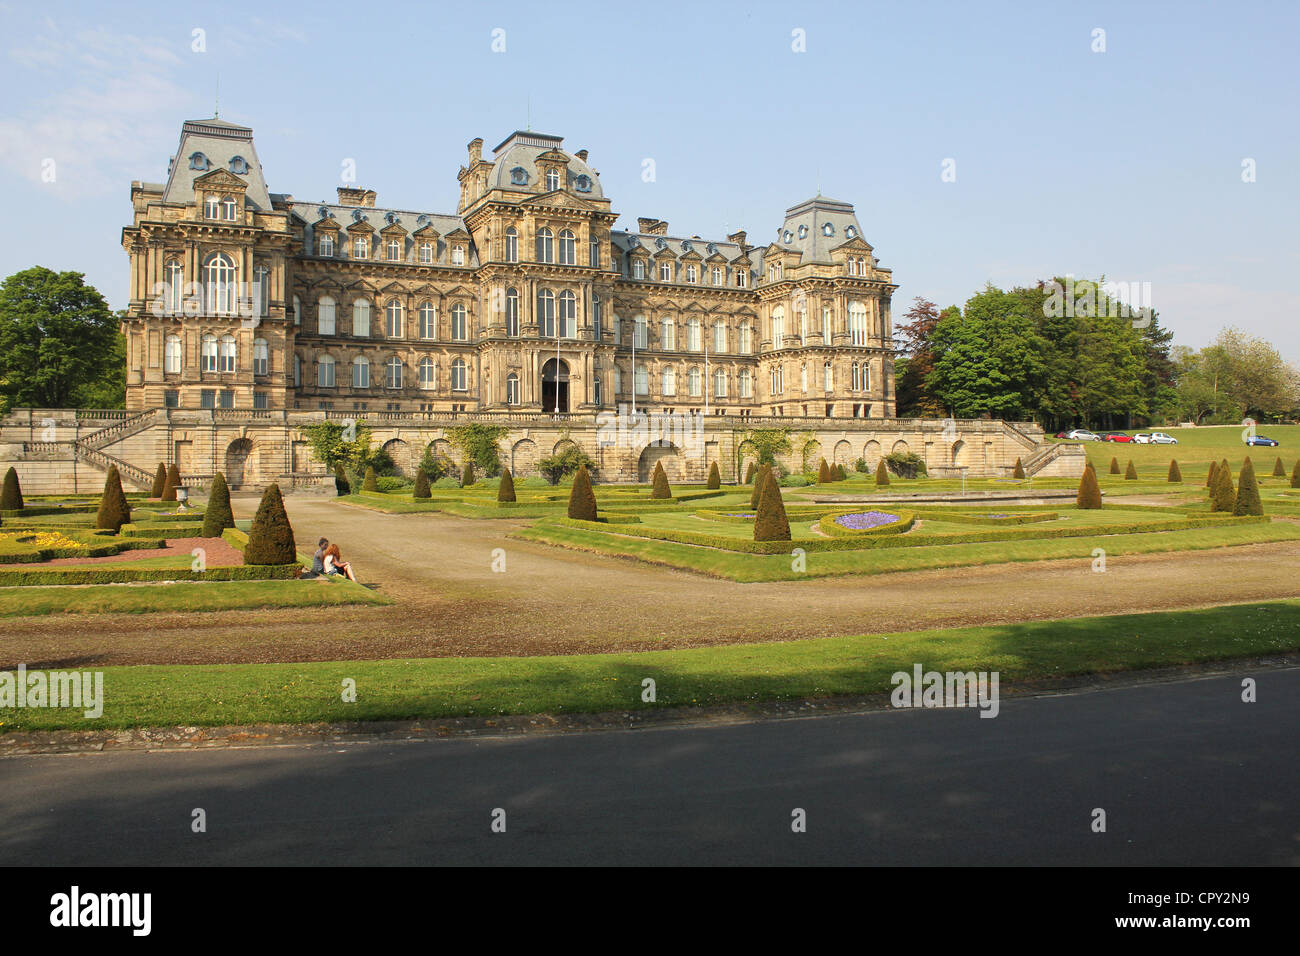 Bowes Museum, Barnard Castle, County Durham, North East England. 23rd May 2012 - museum and formal gardens. Stock Photo